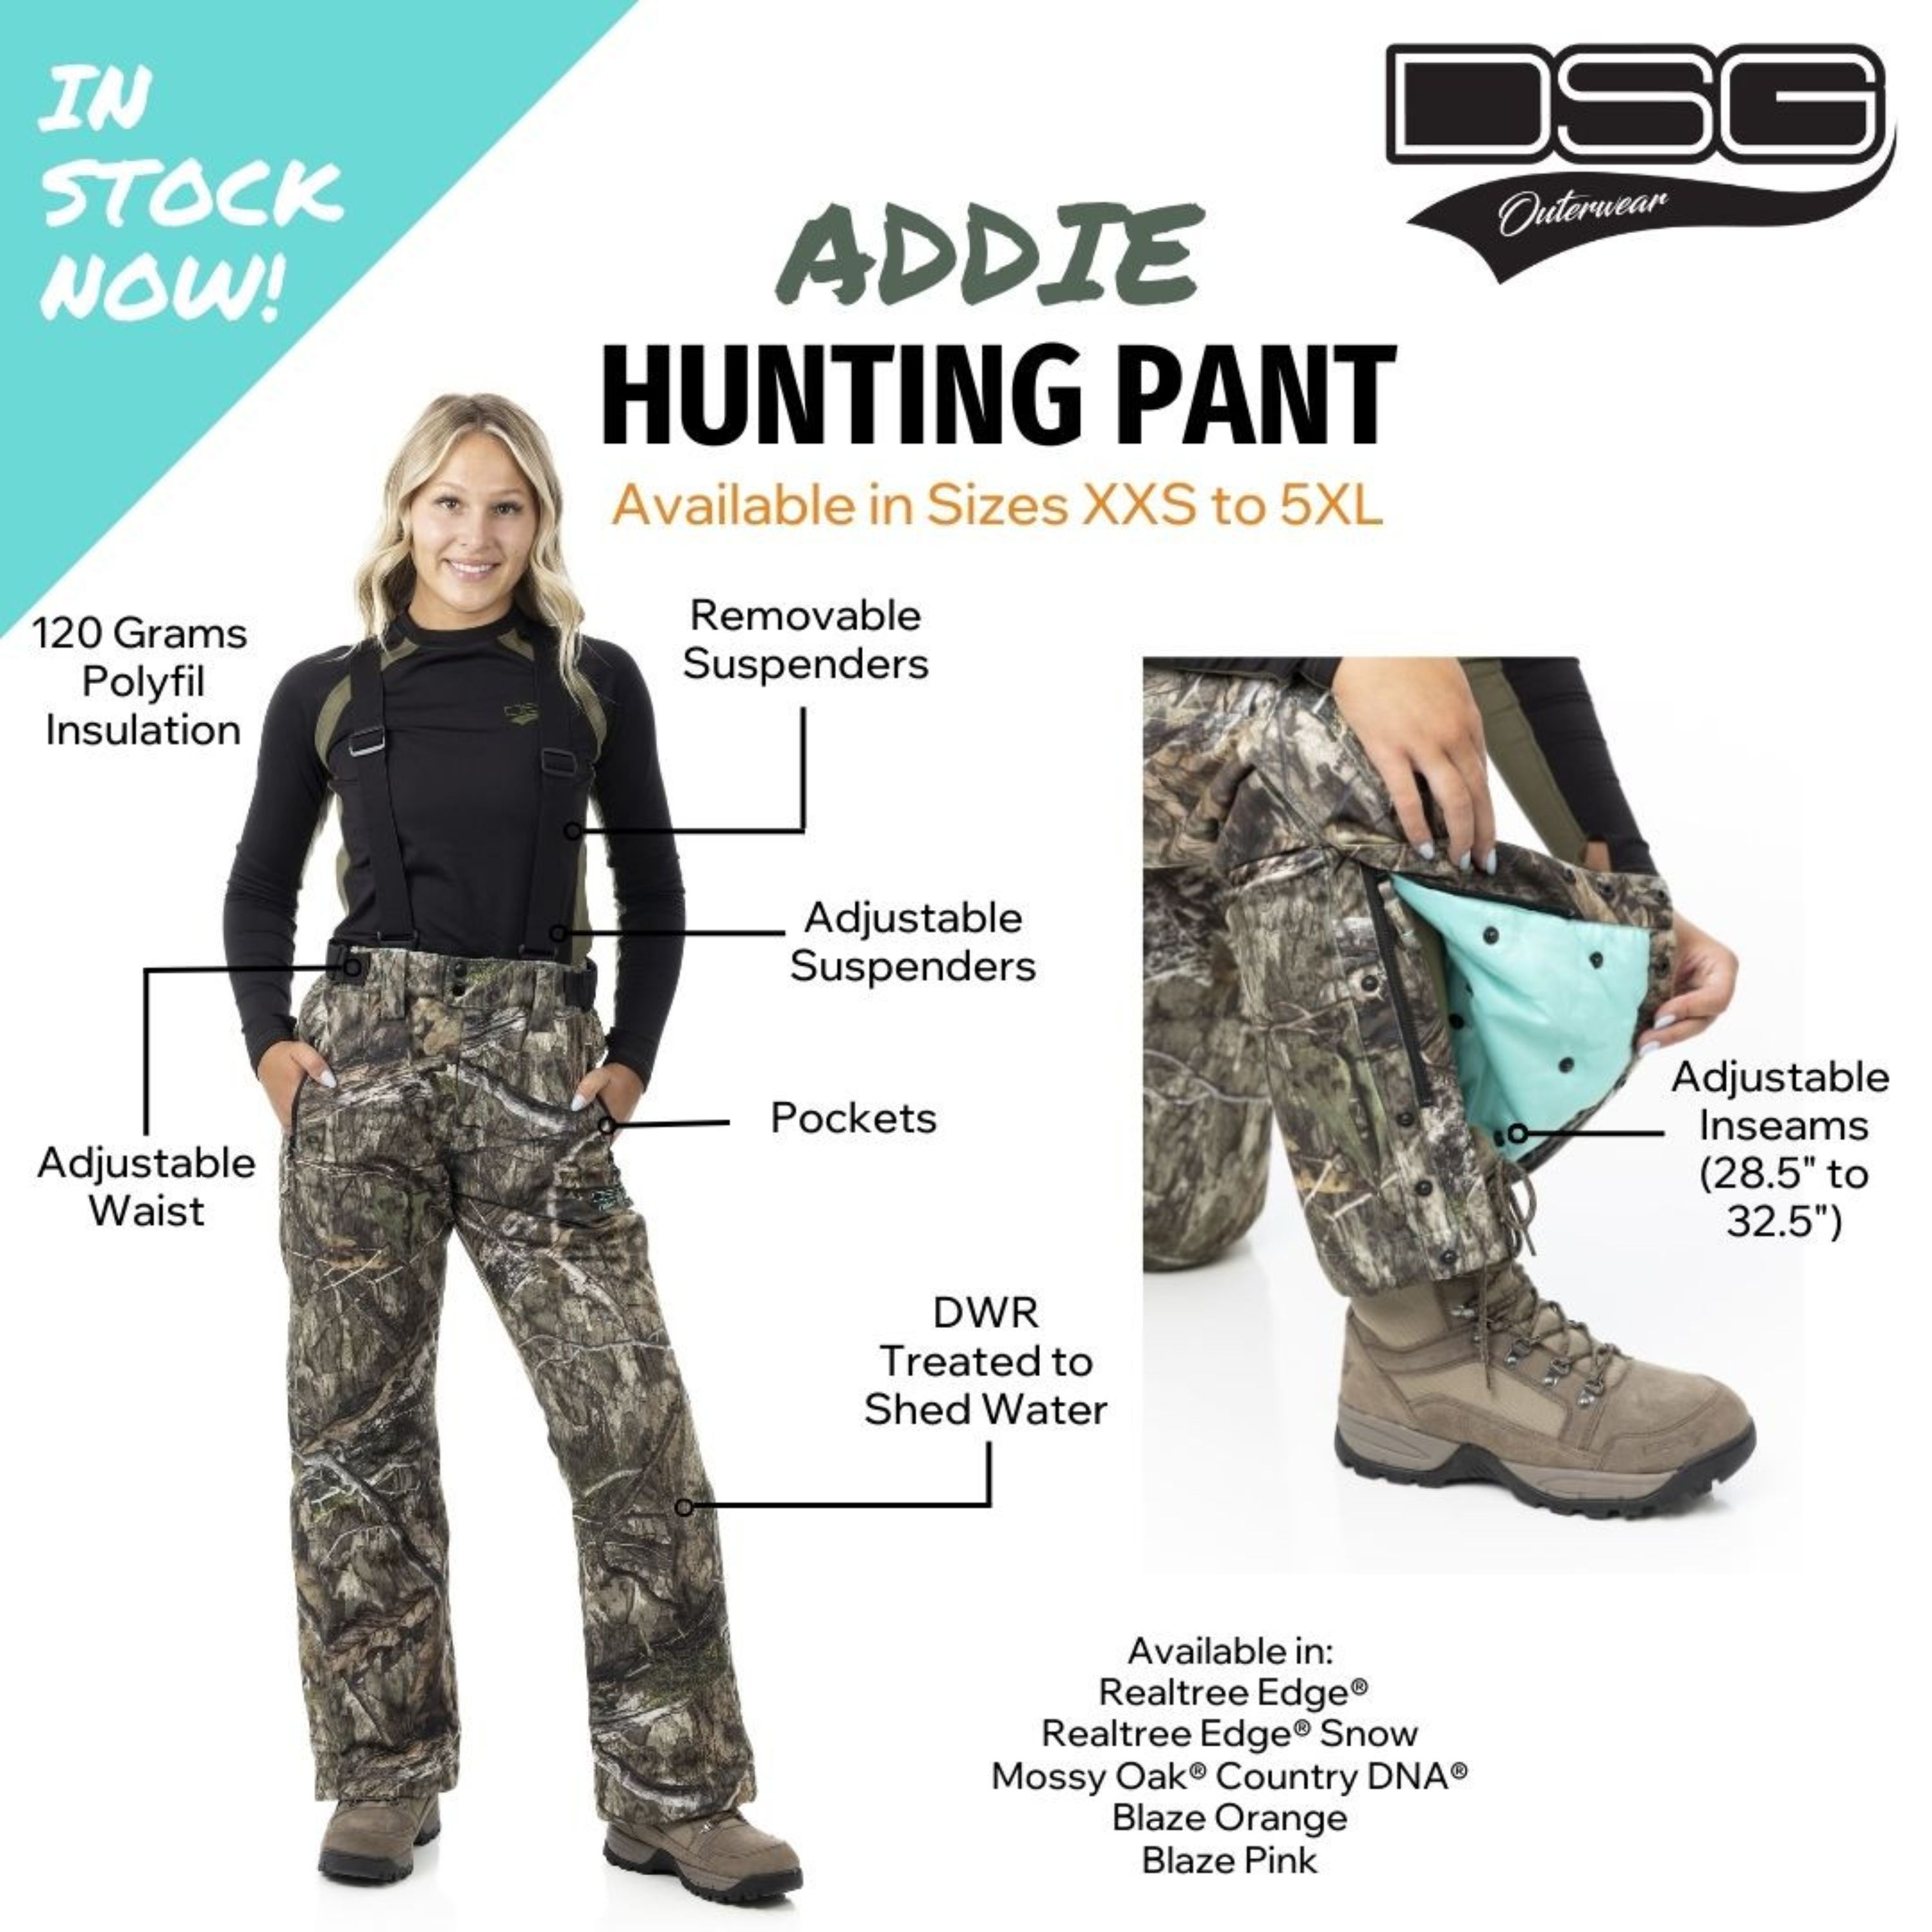 DSG Outerwear Addie Hunting Pant - Realtree Edge - S